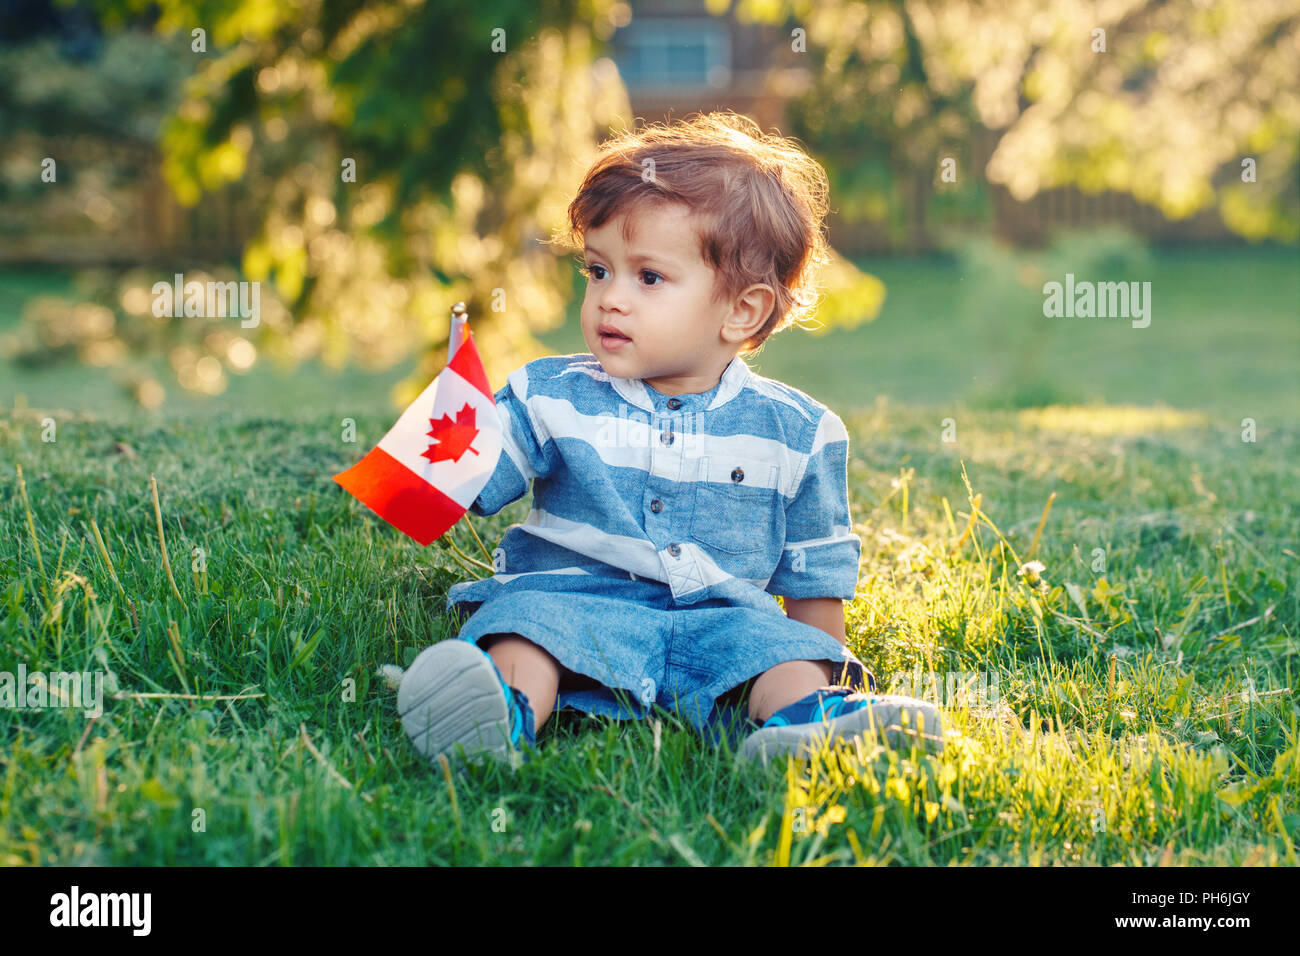 portrait of little white Caucasian baby boy holding Canadian flag with red maple leaf. Toddler celebrating national Canada day sitting on grass in sum Stock Photo